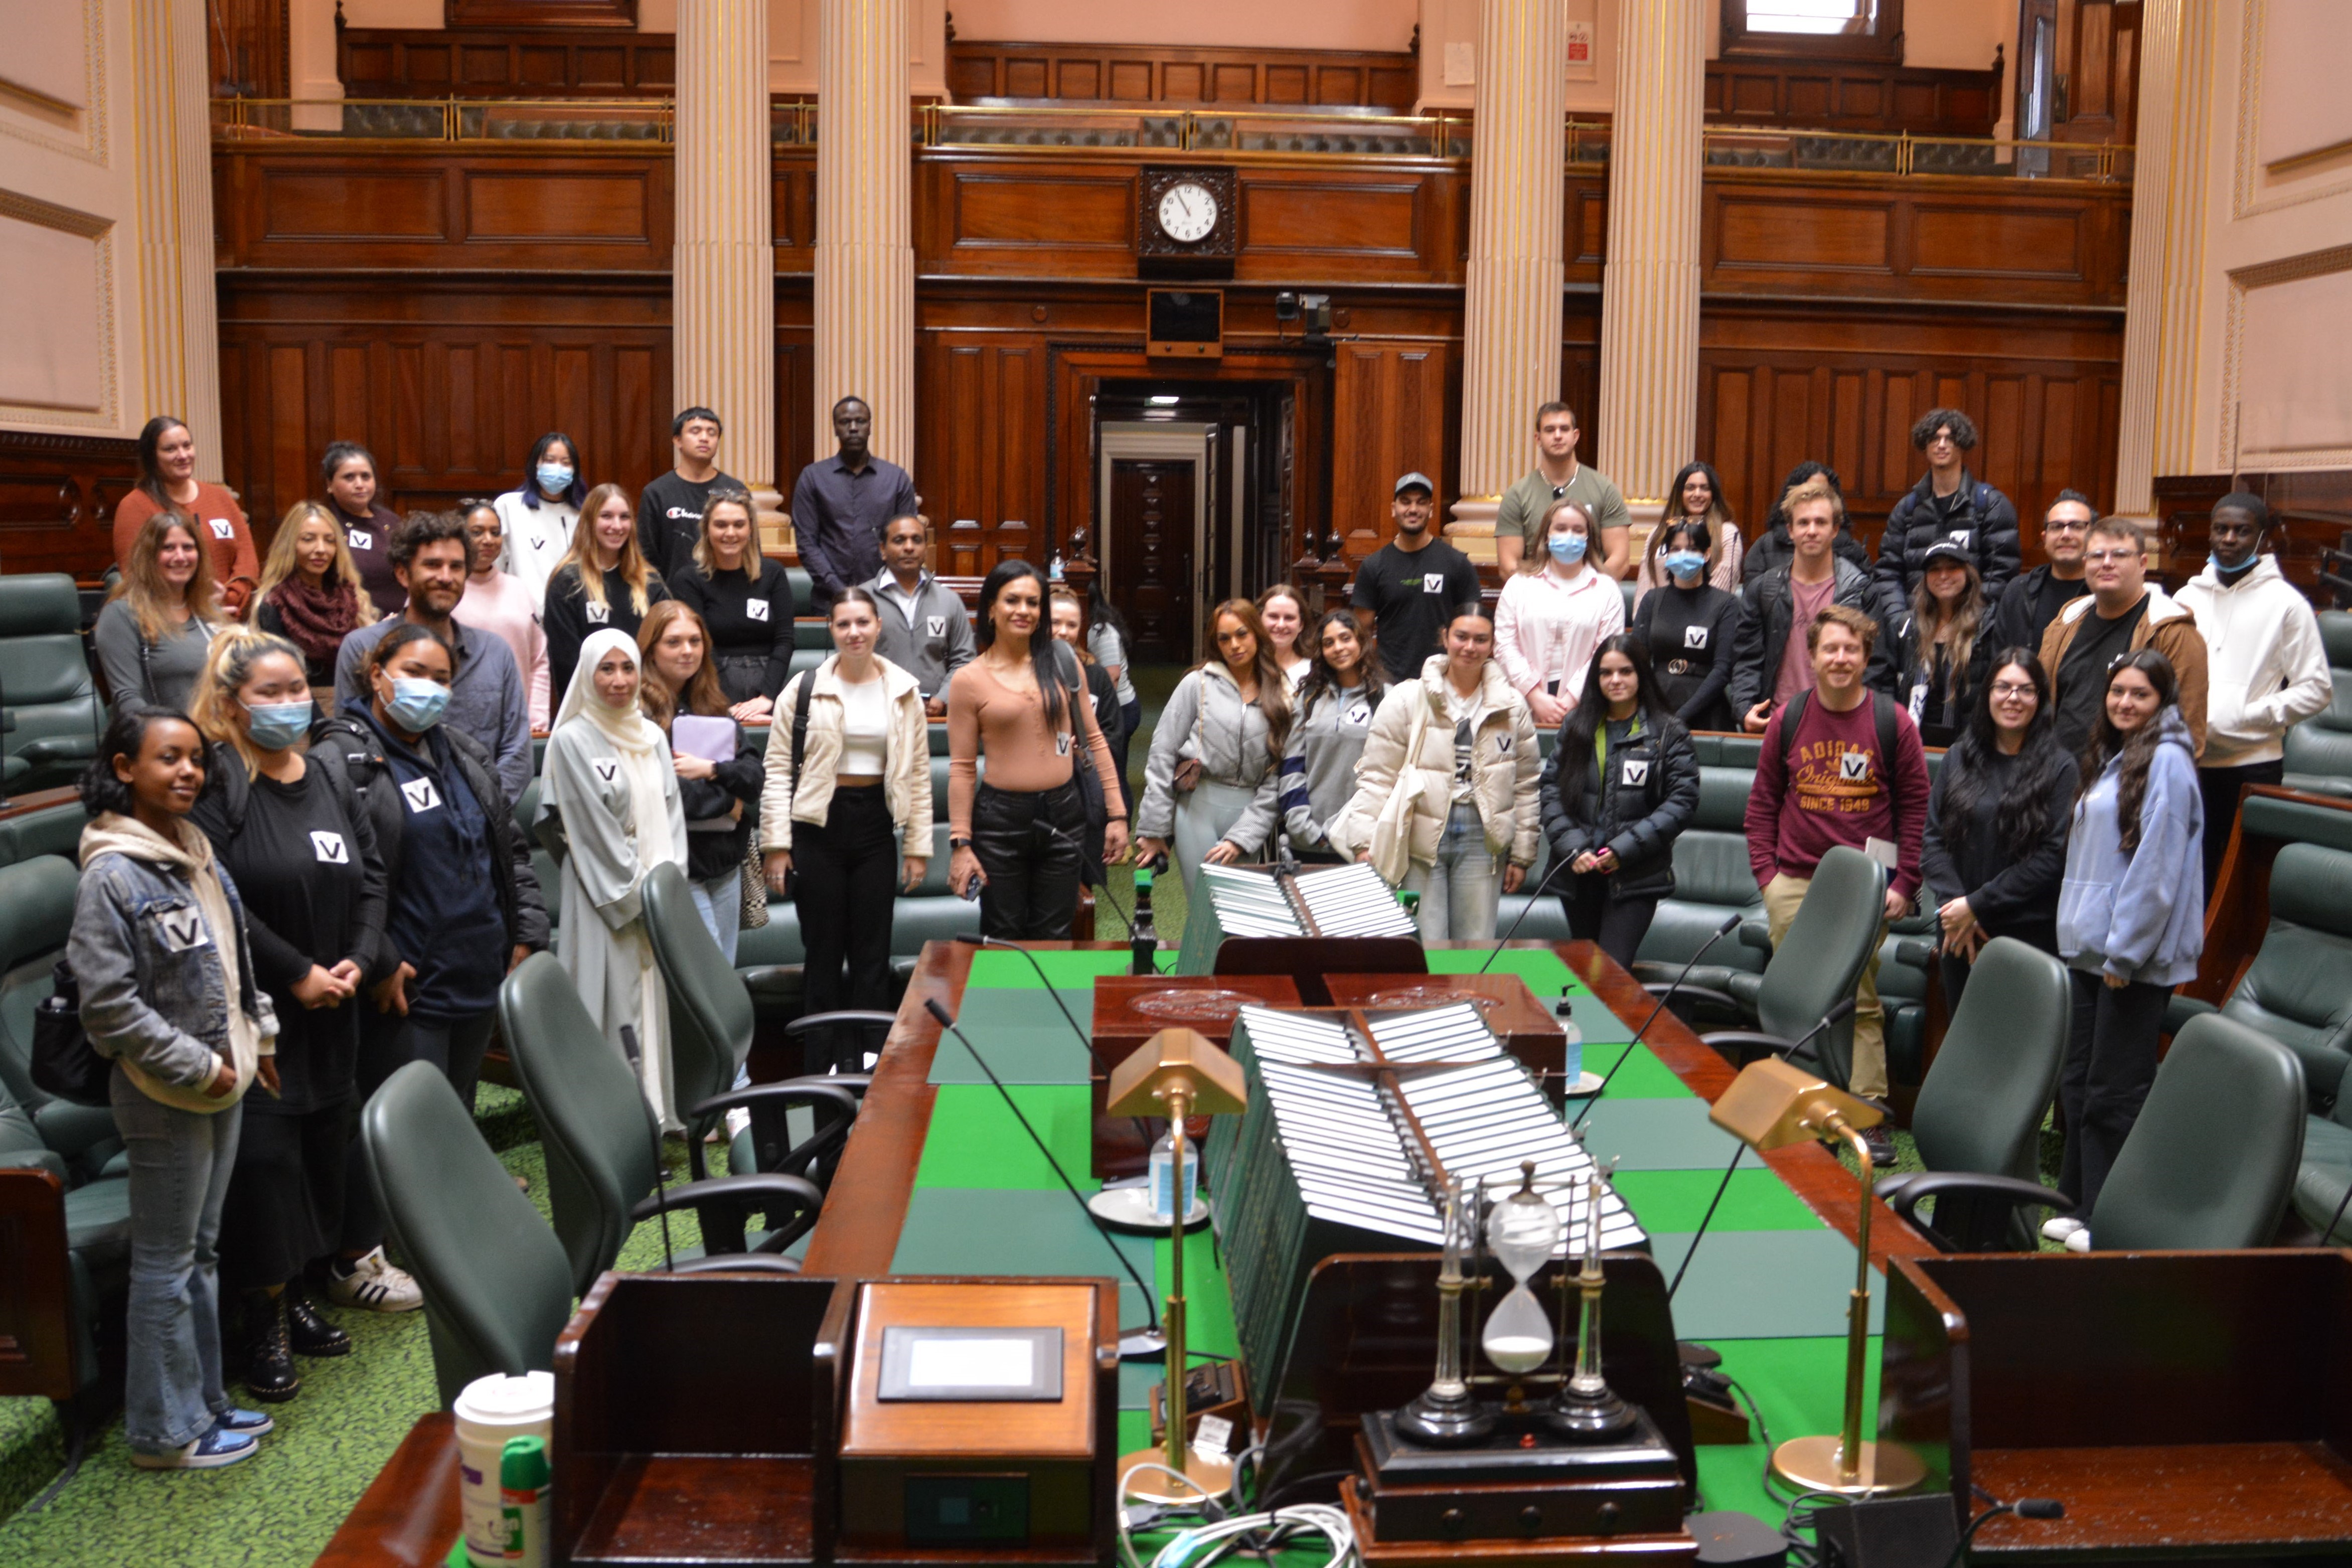 Victoria University students learning in the Legislative Assembly chamber.